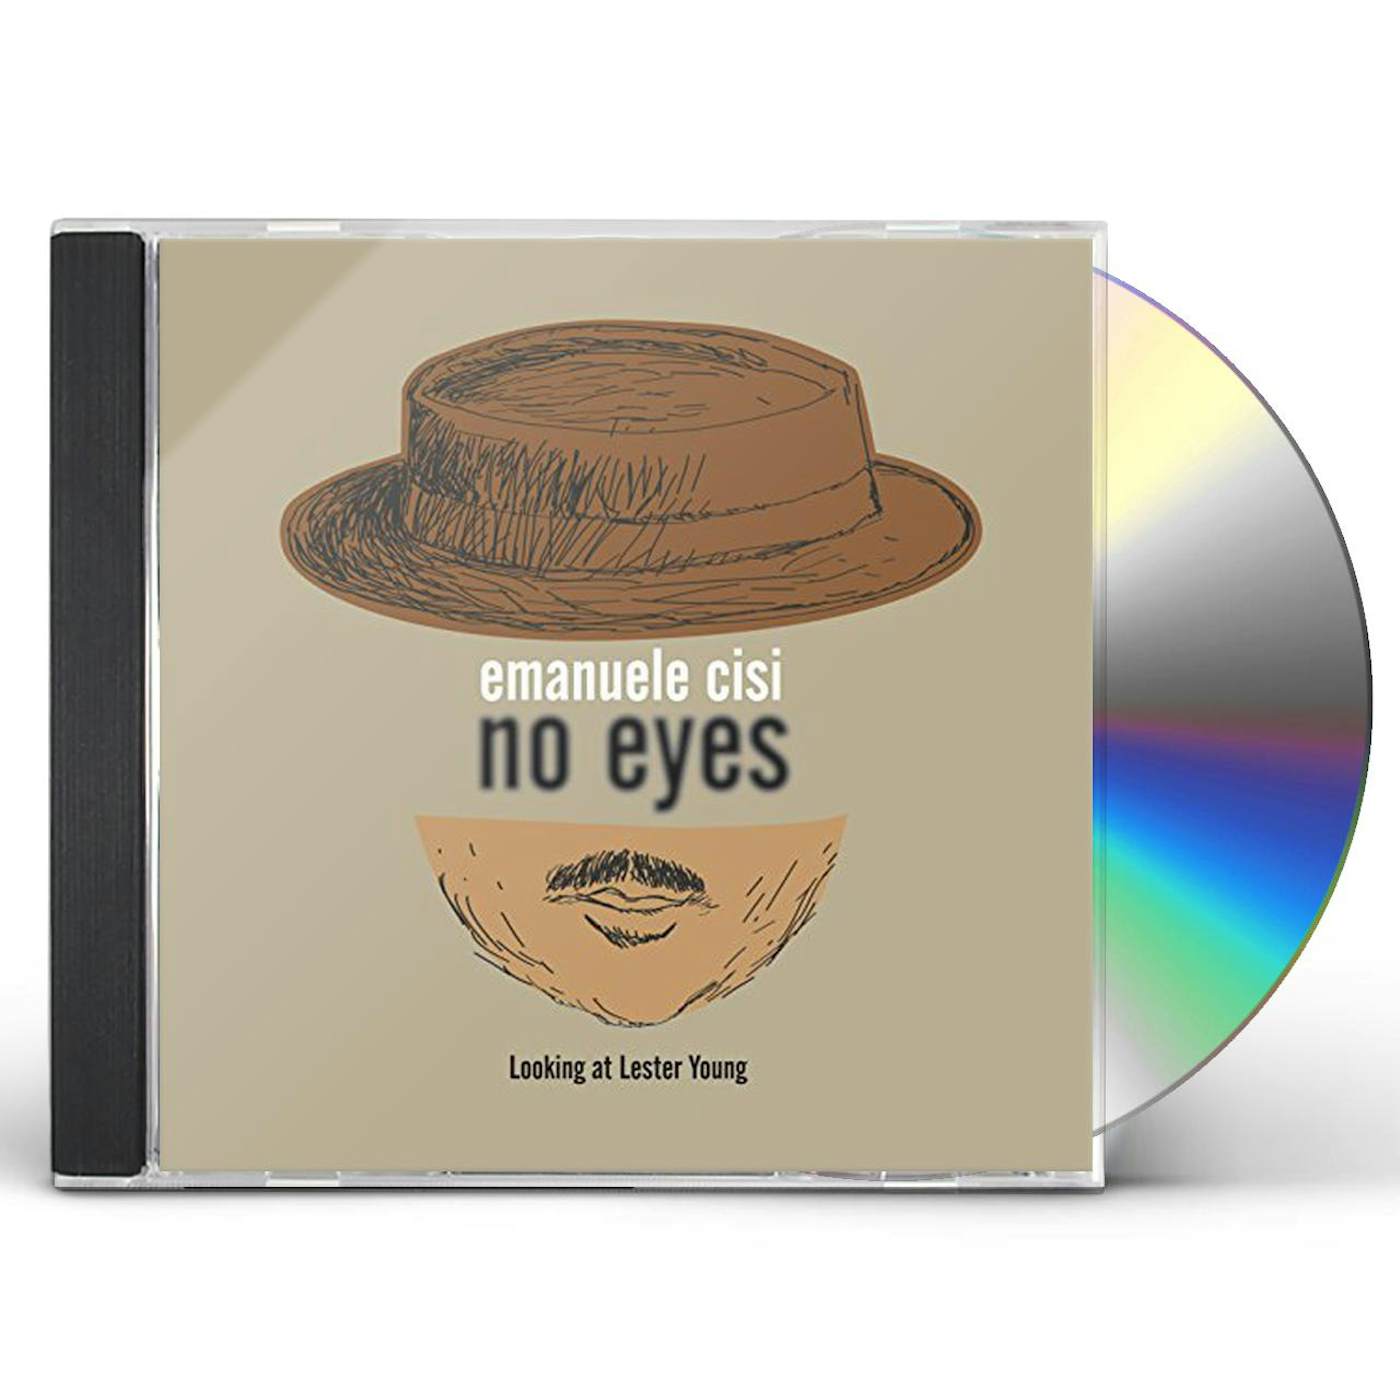 Emanuele Cisi NO EYES: LOOKING AT LESTER YOUNG CD